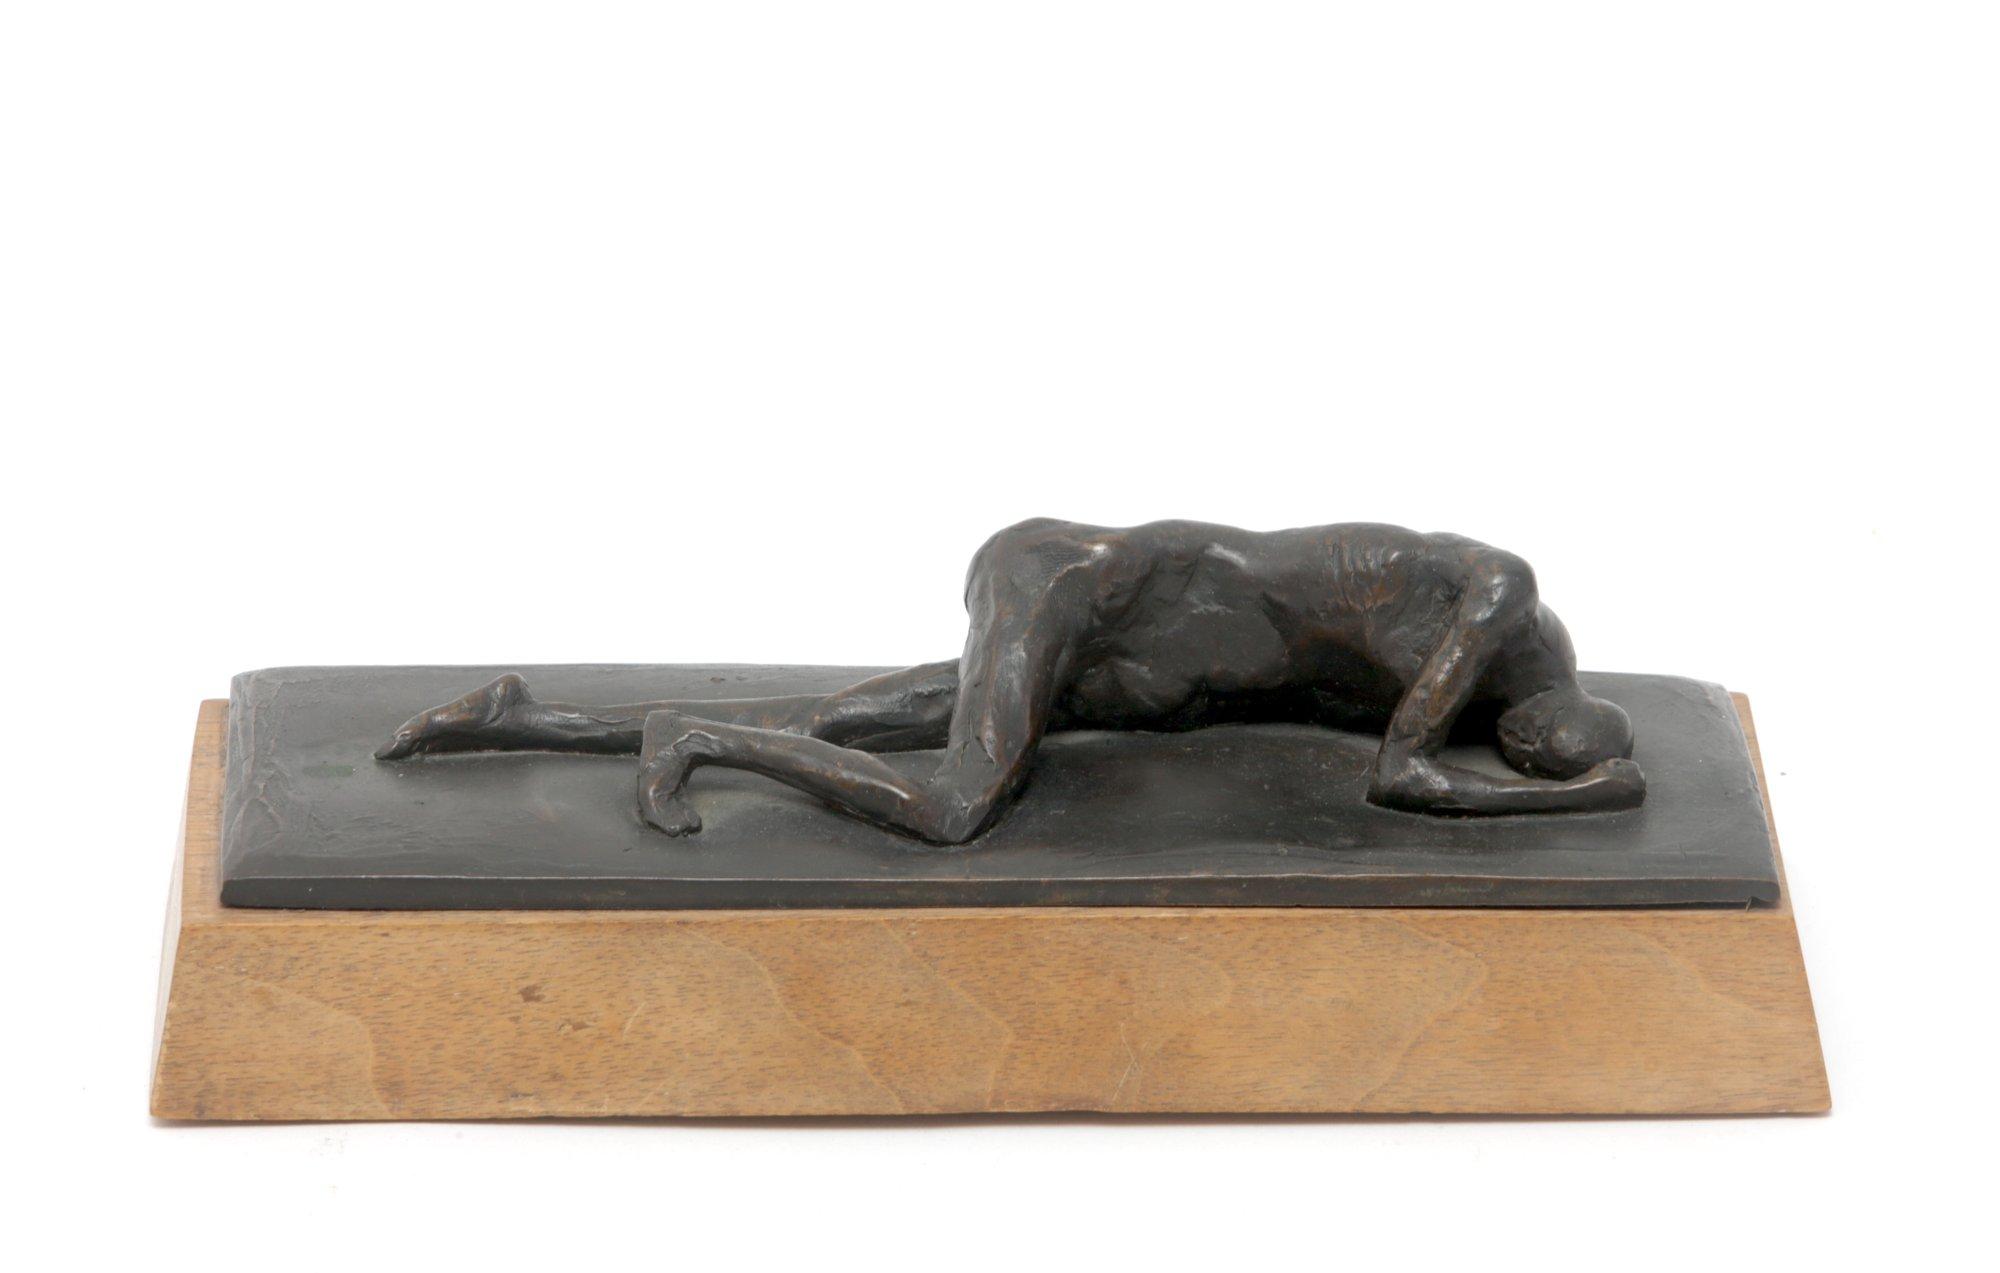 Bronze Sculpture Of Prone Man Mounted On Wood Base